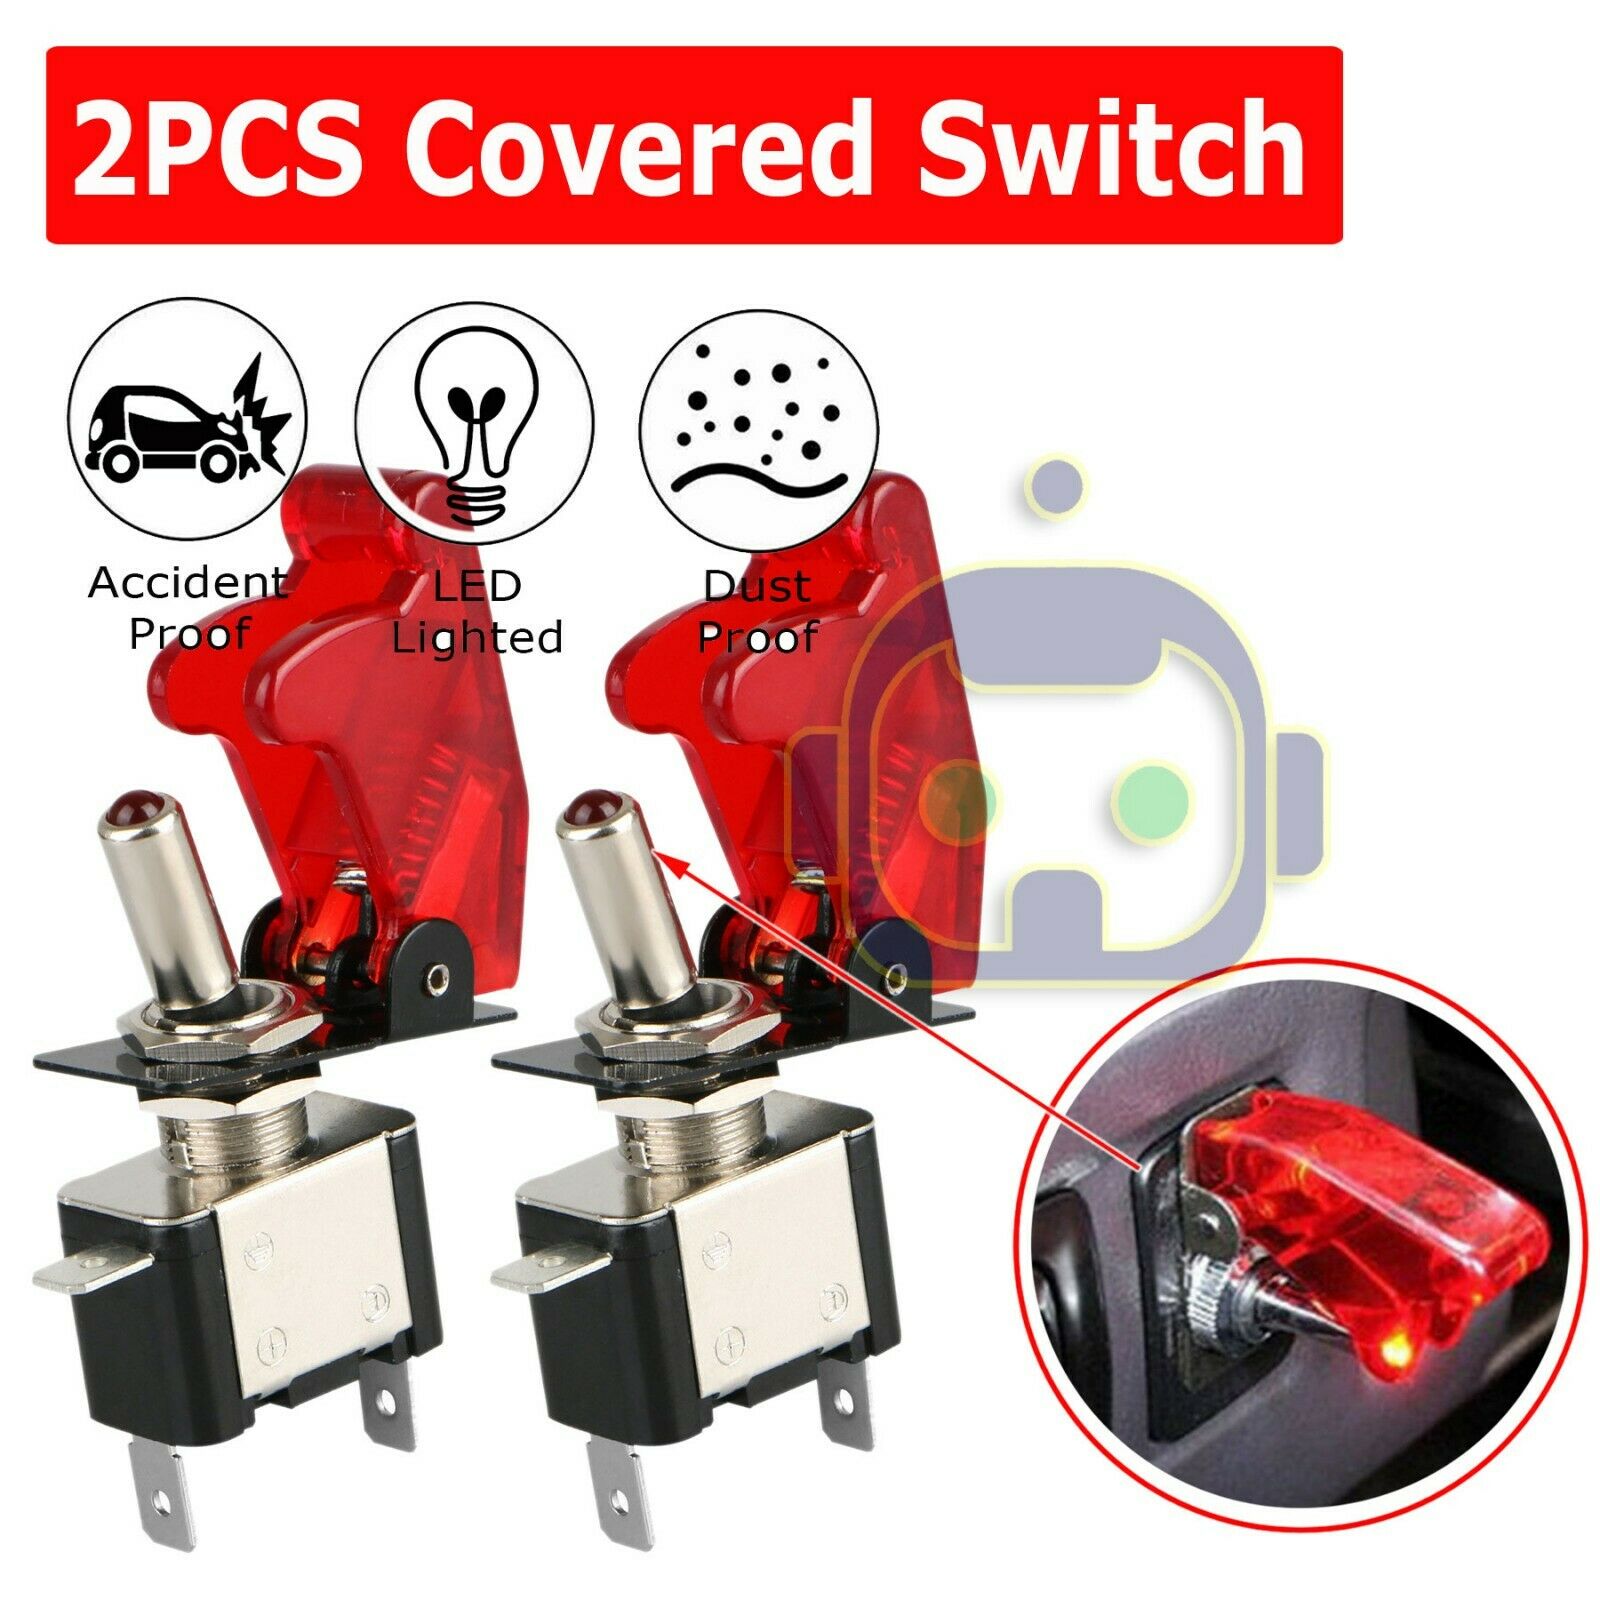 2X Red Cover LED Toggle Switch Racing SPST ON/OFF 20A ATV 12V New For Car Truck